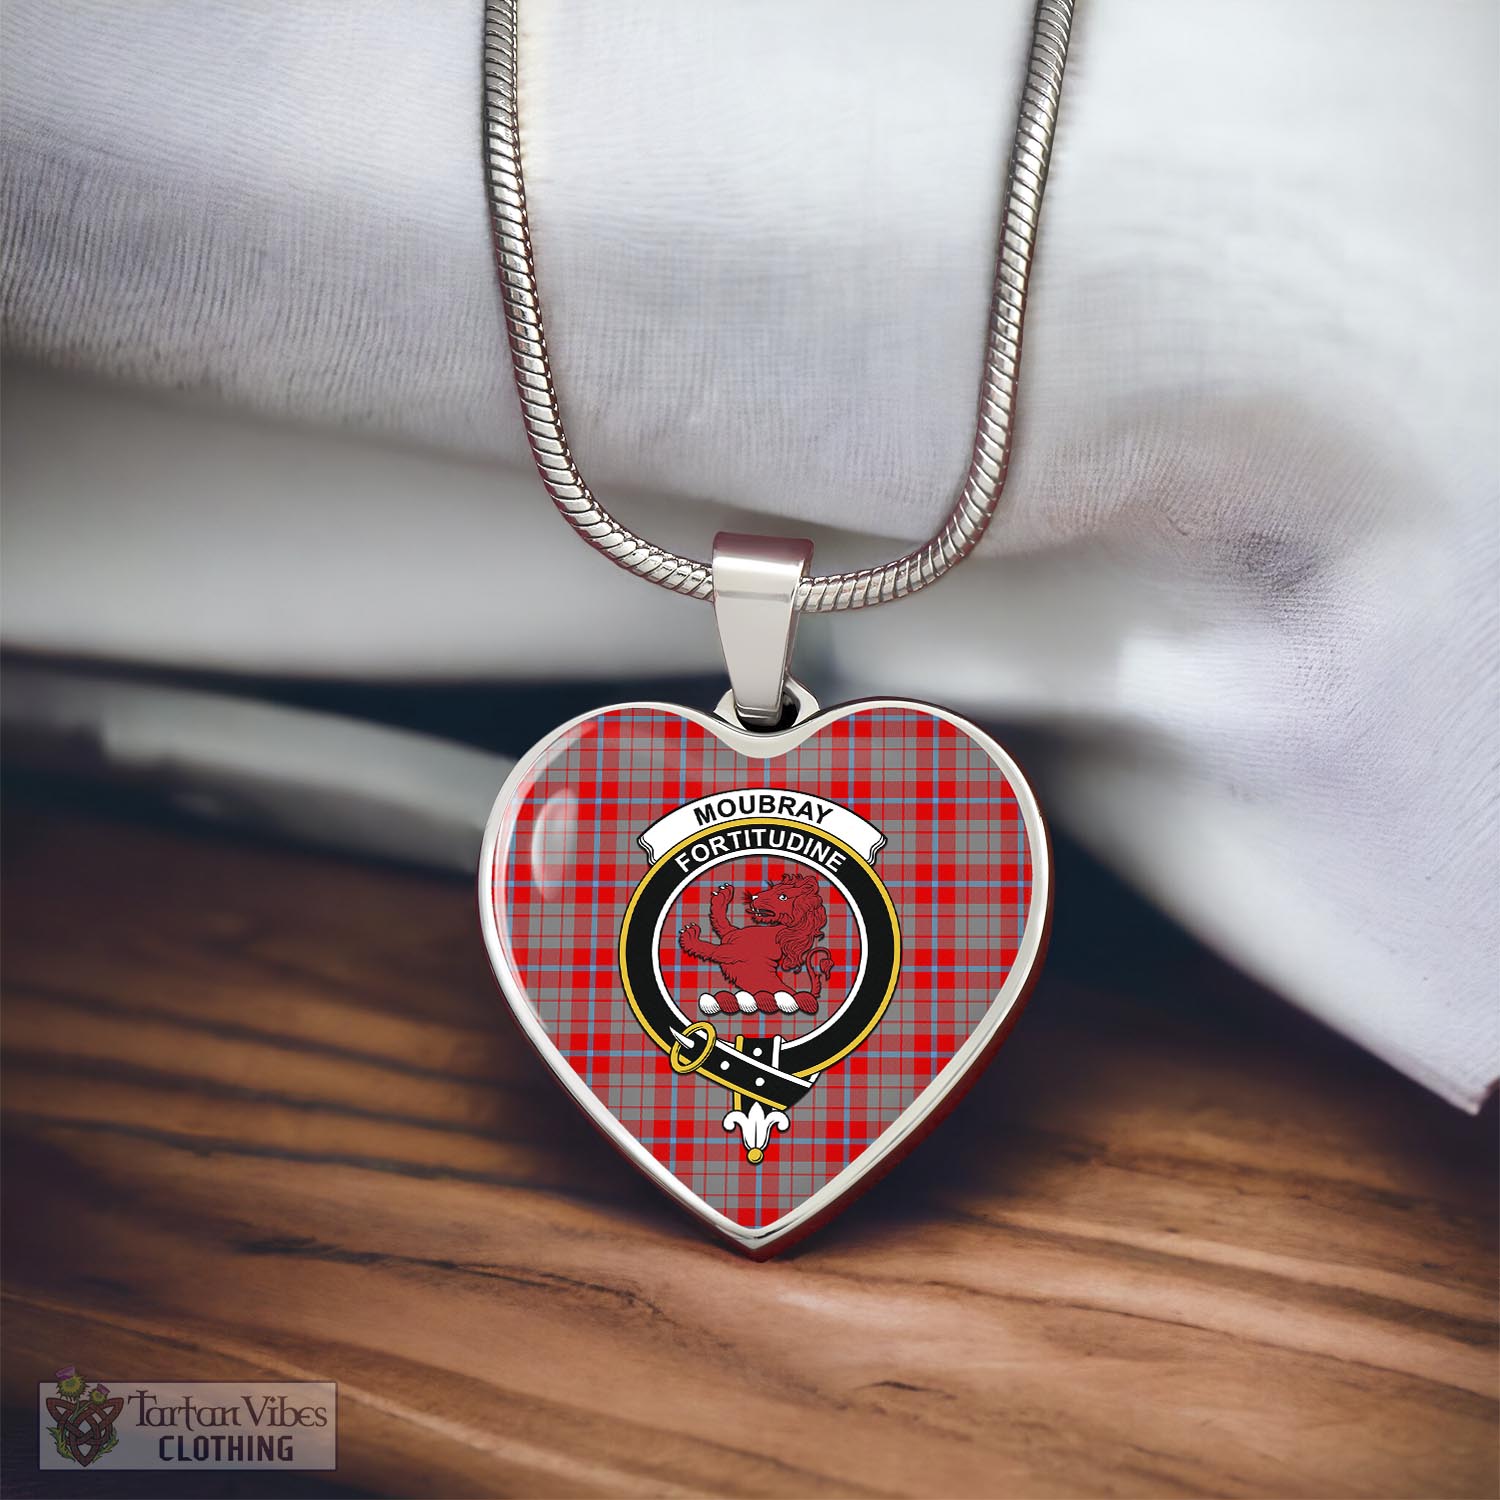 Tartan Vibes Clothing Moubray Tartan Heart Necklace with Family Crest